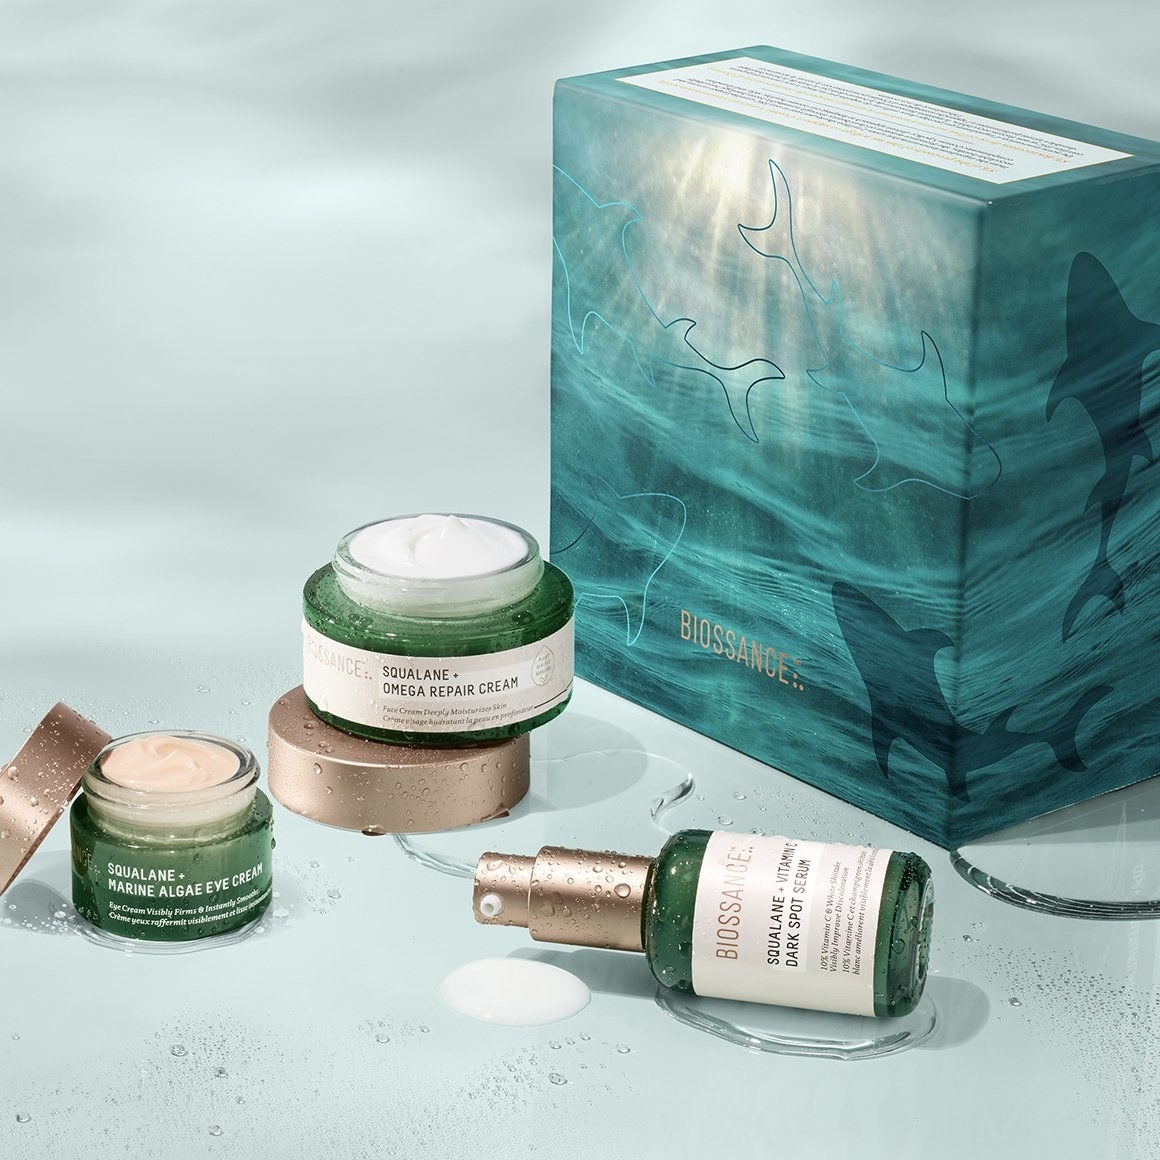 Biossance skincare set styled on table